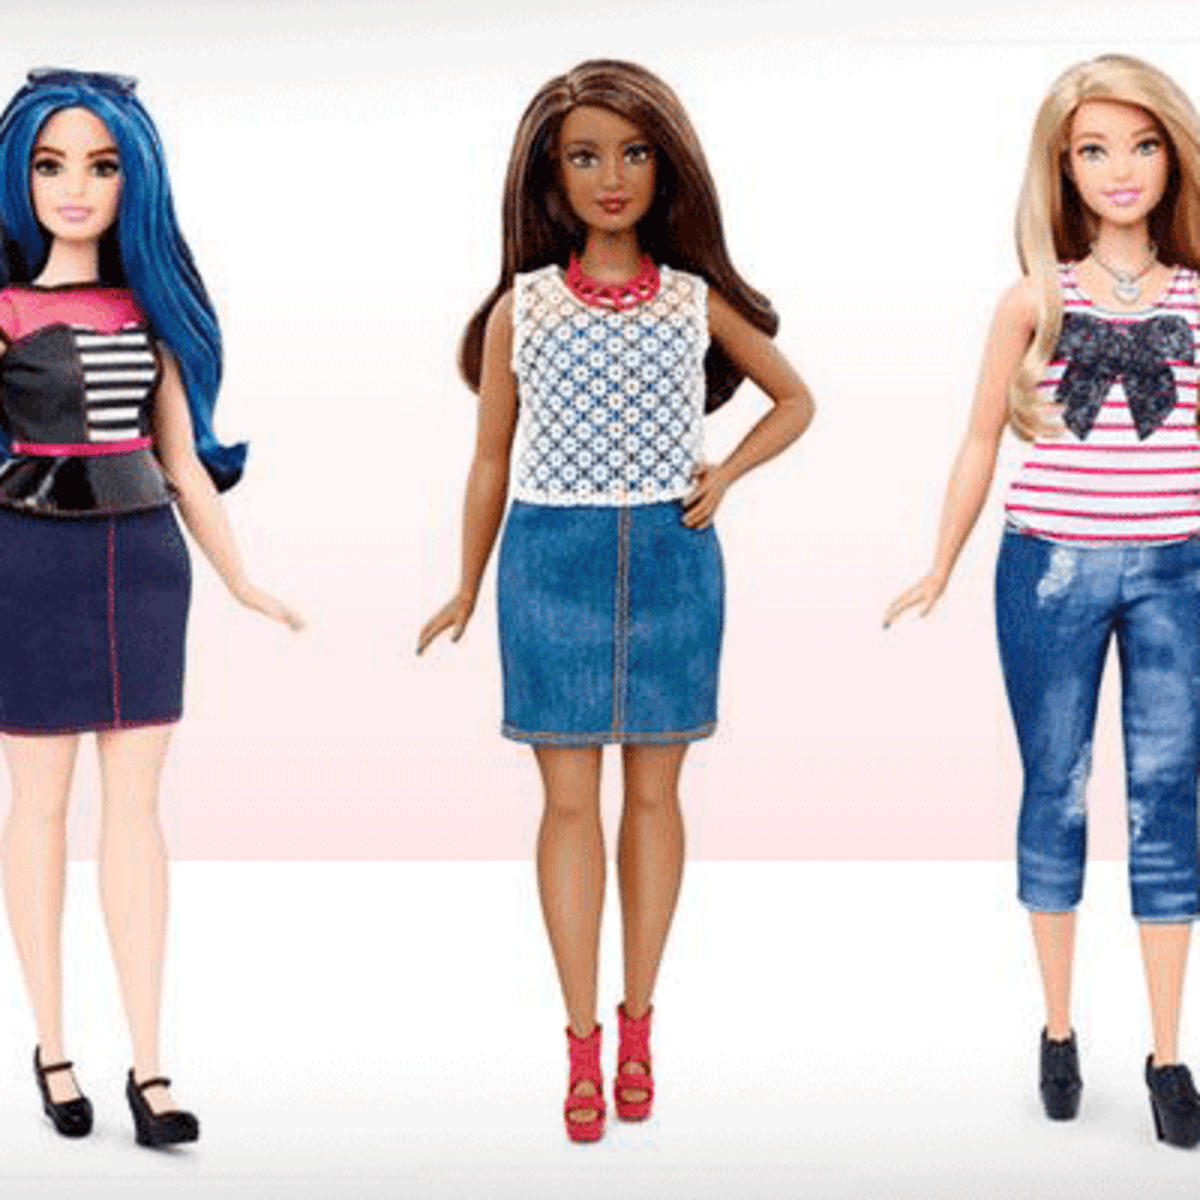 Plus Size Barbie Steps Out, Sales Gains Expected - TheStreet